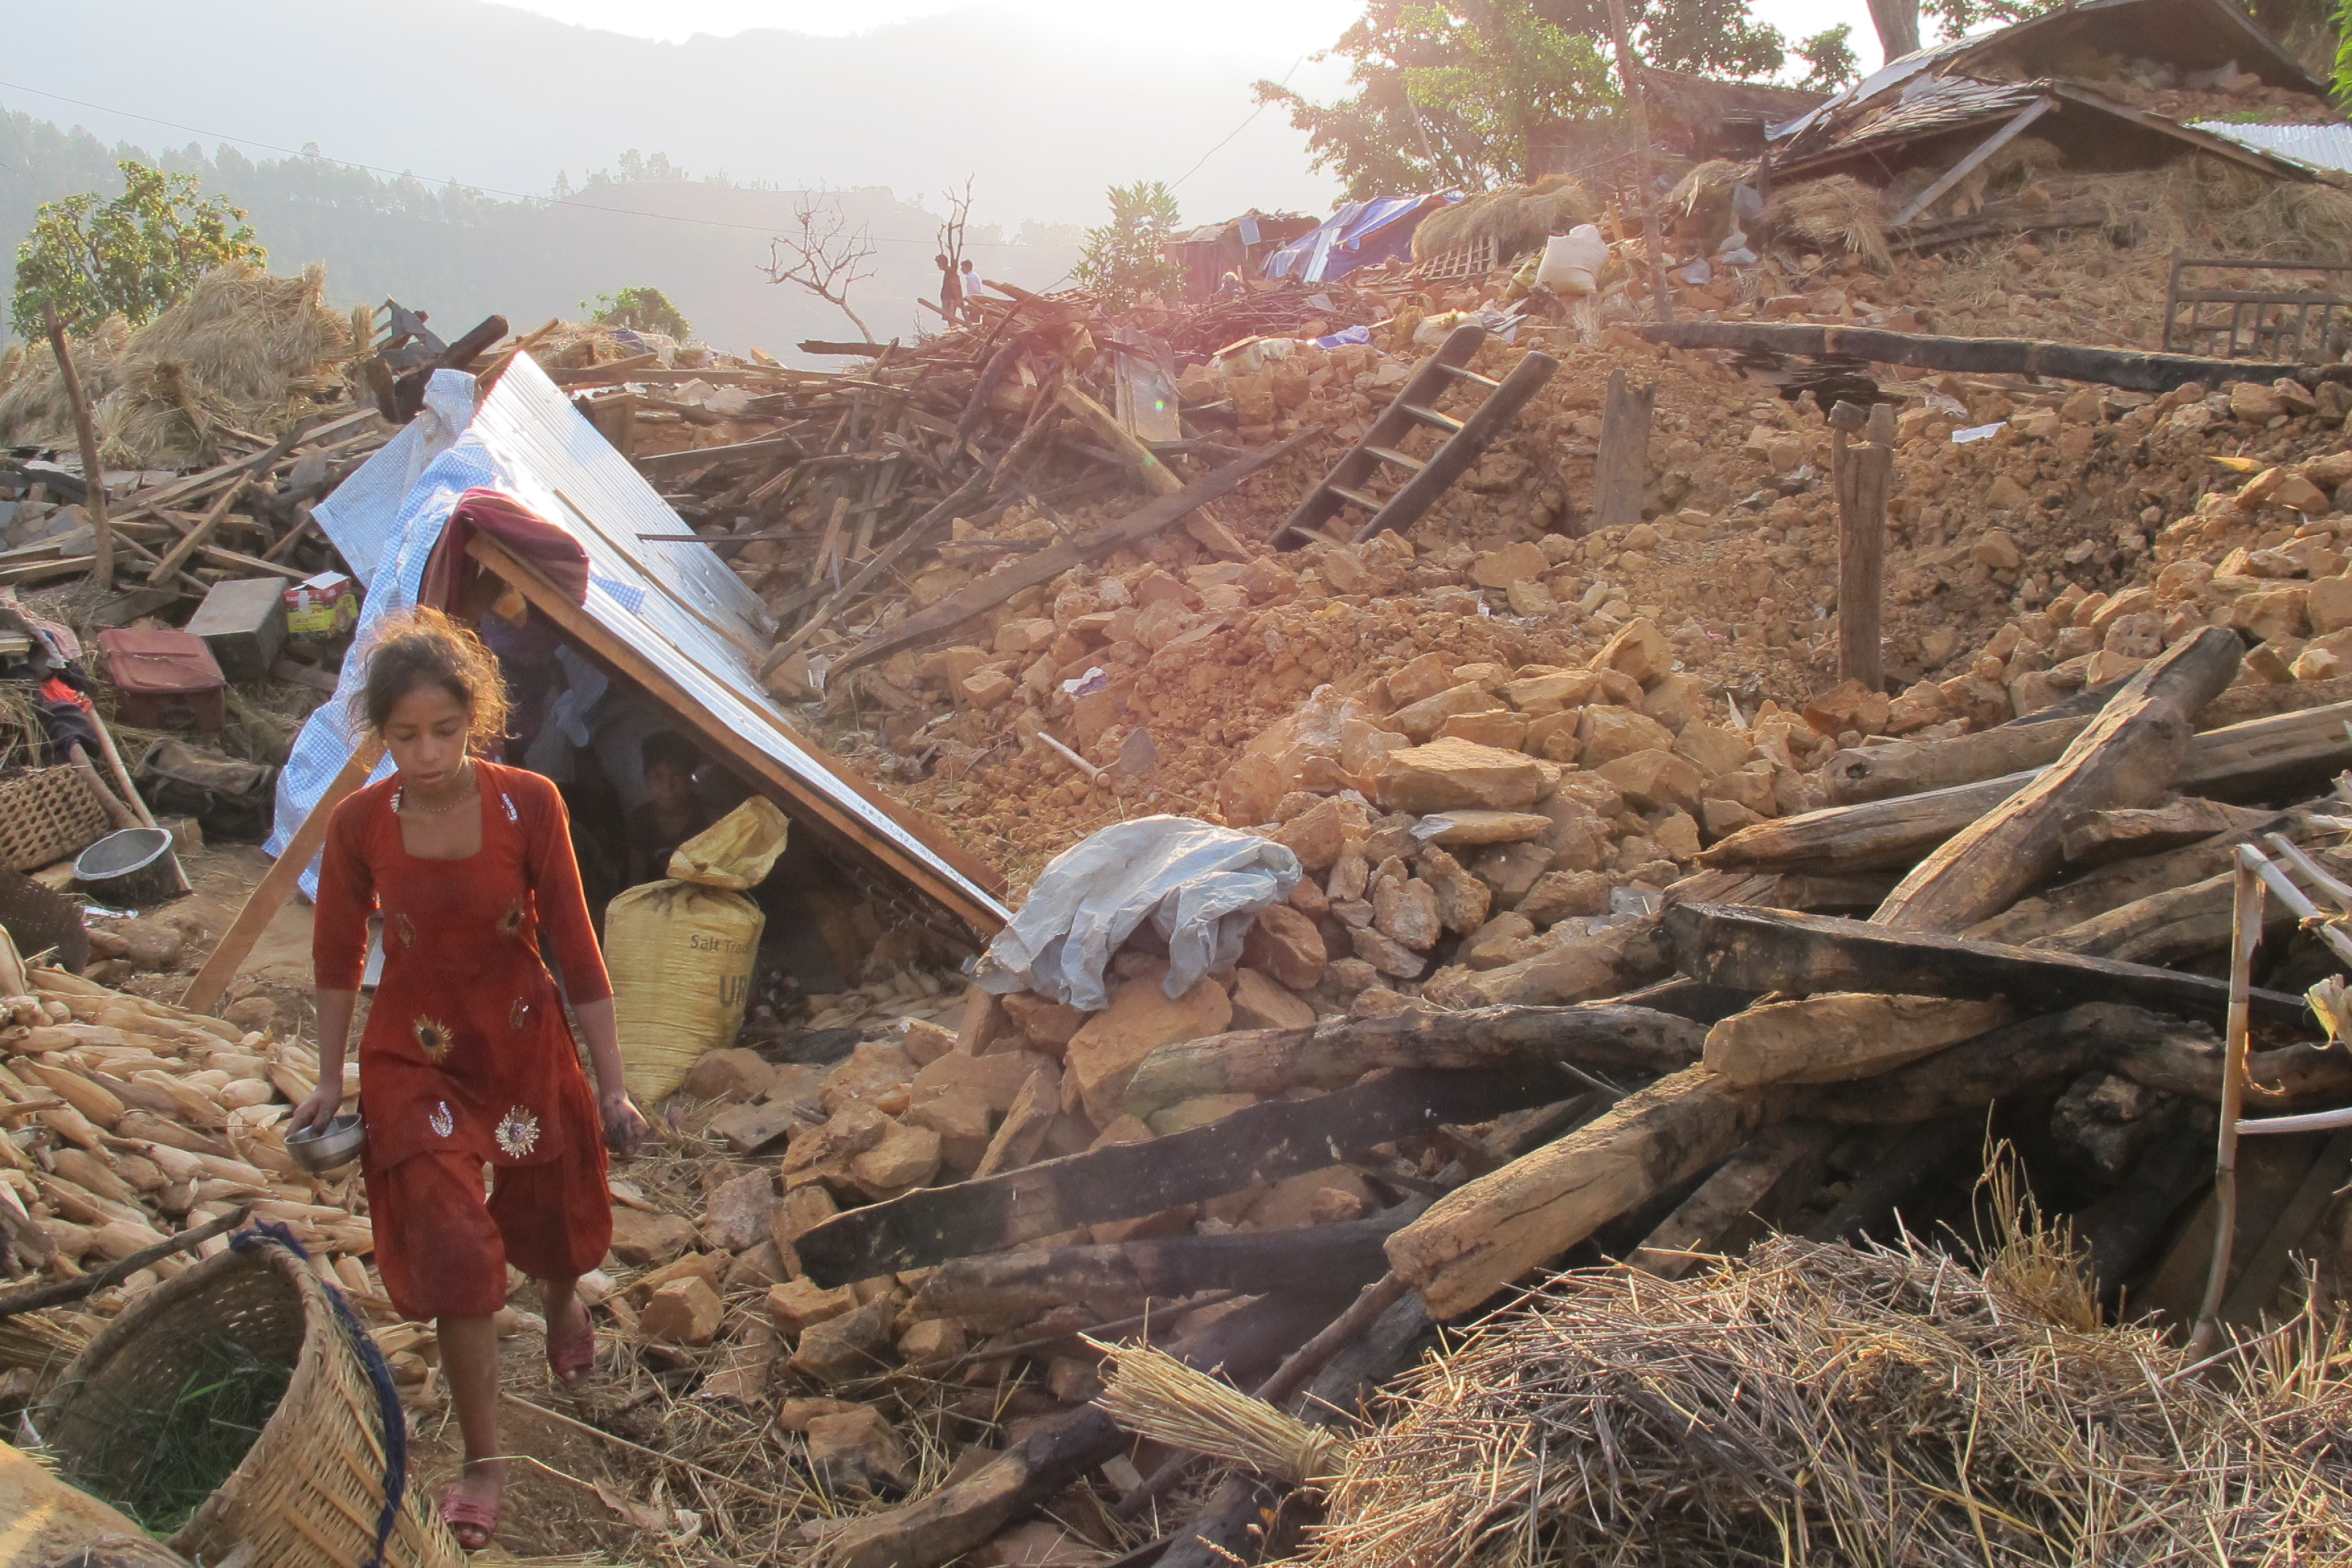 A young girl walks near her tent amidst the rubble in Khalte, Nepal.